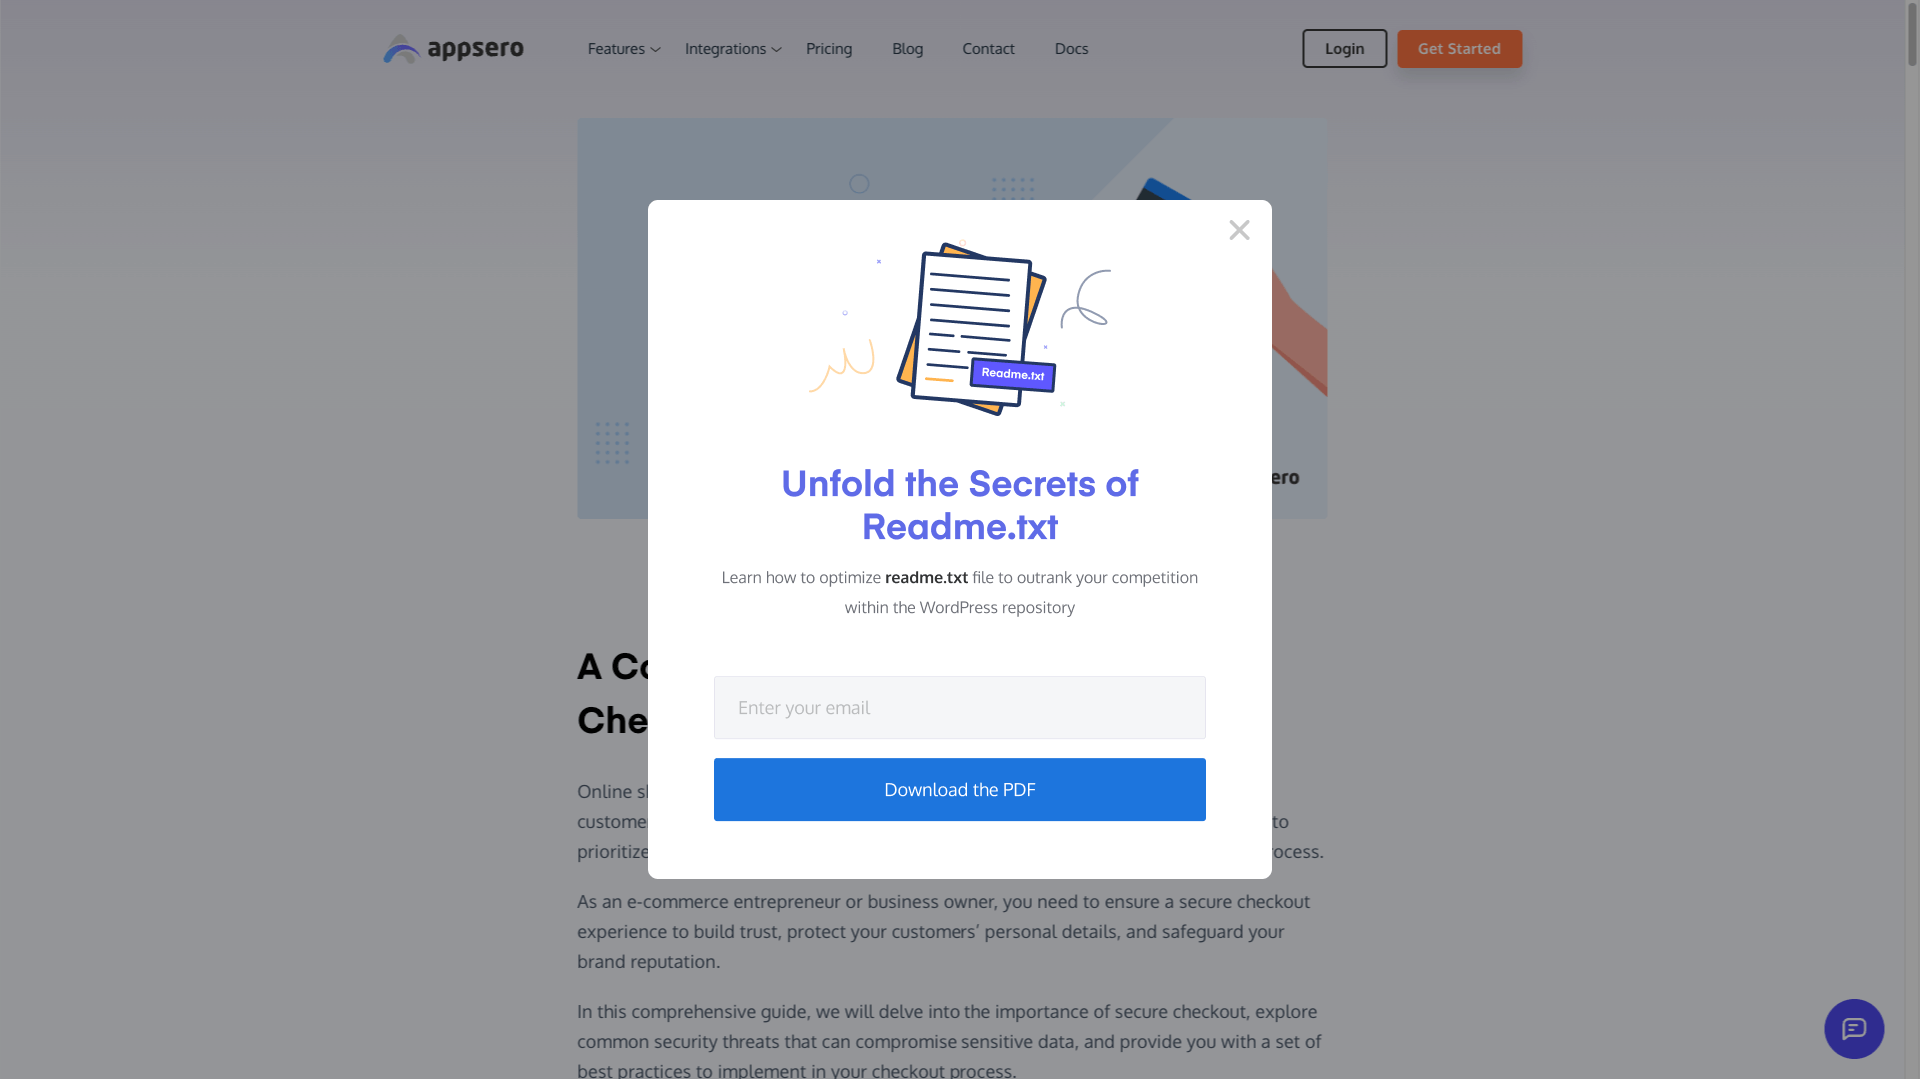 Modal opt-in forms